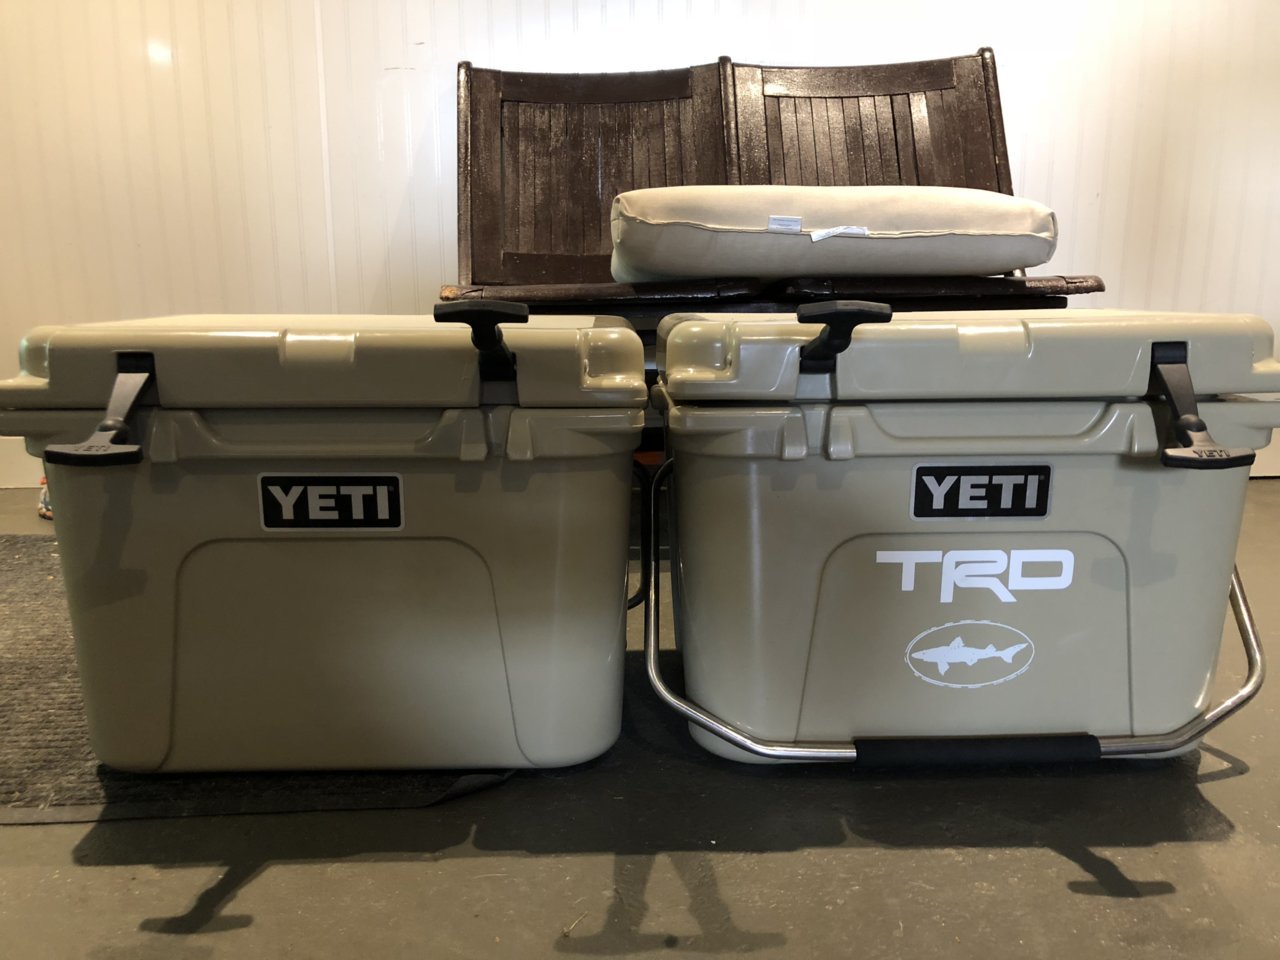 Yeti customer service is top notch. Lid on my Roadie 24 warped from sun  heat and probably me sitting on it. They are sending me a replacement stat!  Also check out the